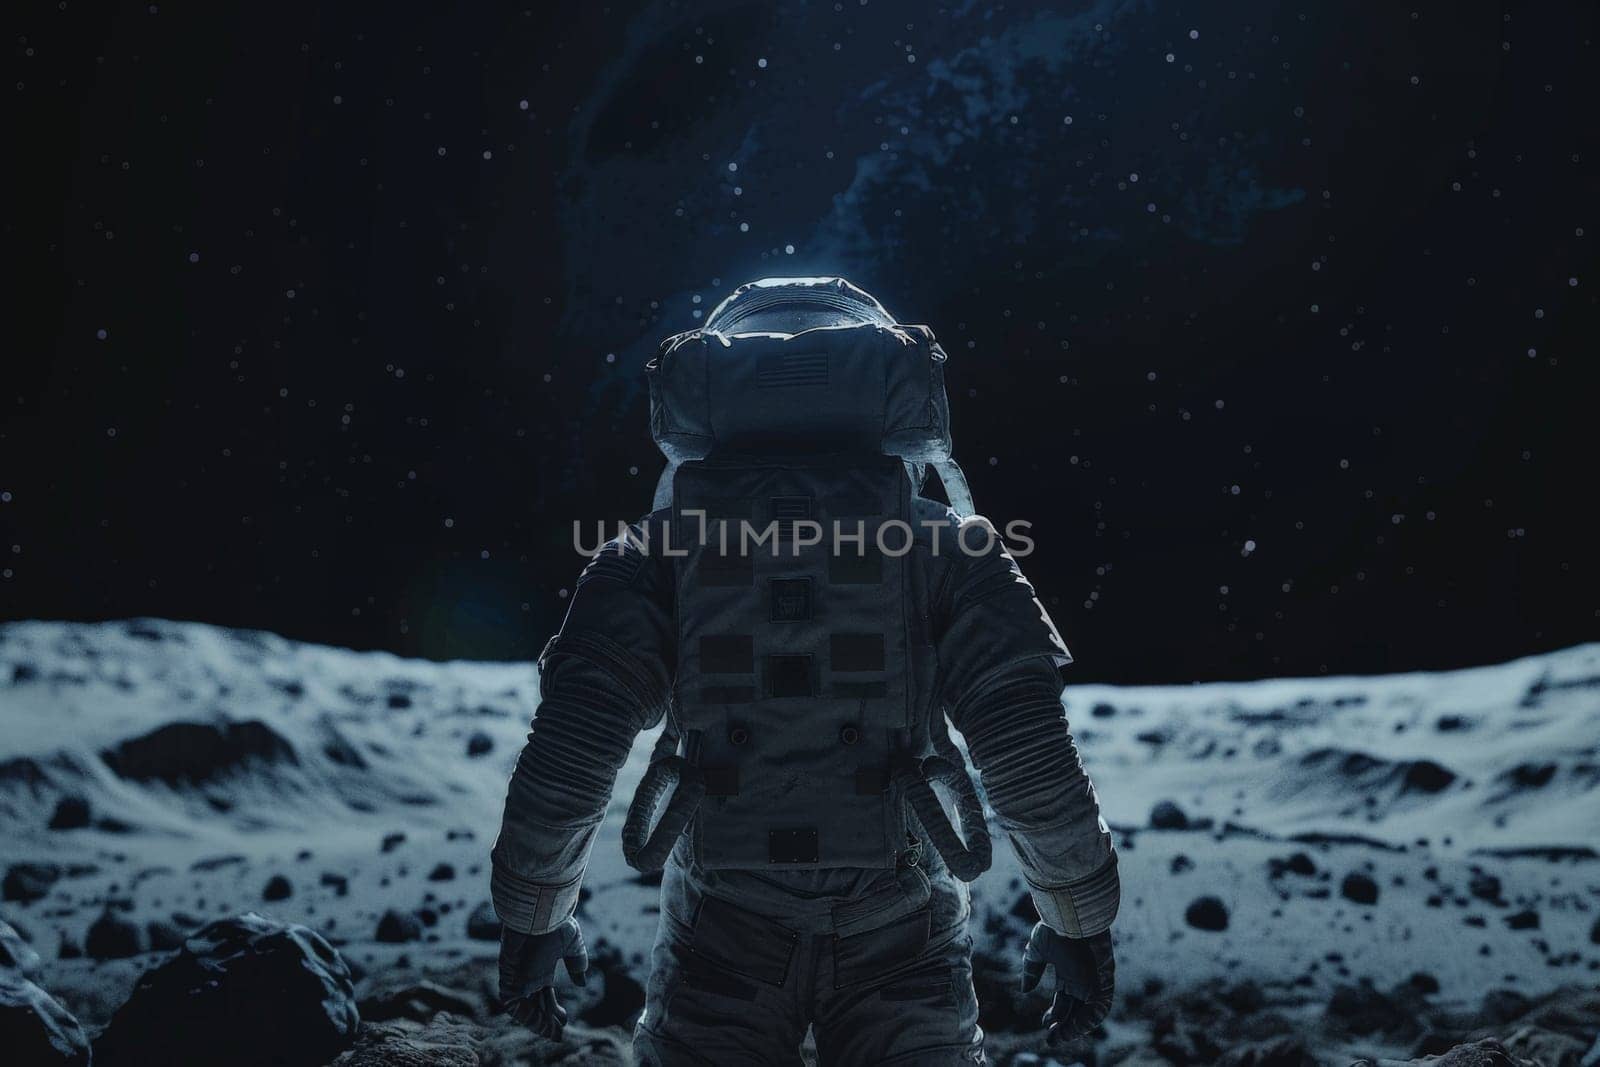 A man in a spacesuit stands on a rocky surface in the dark. Concept of isolation and adventure, as the astronaut is alone in the vastness of space. The contrast between the man's bright suit